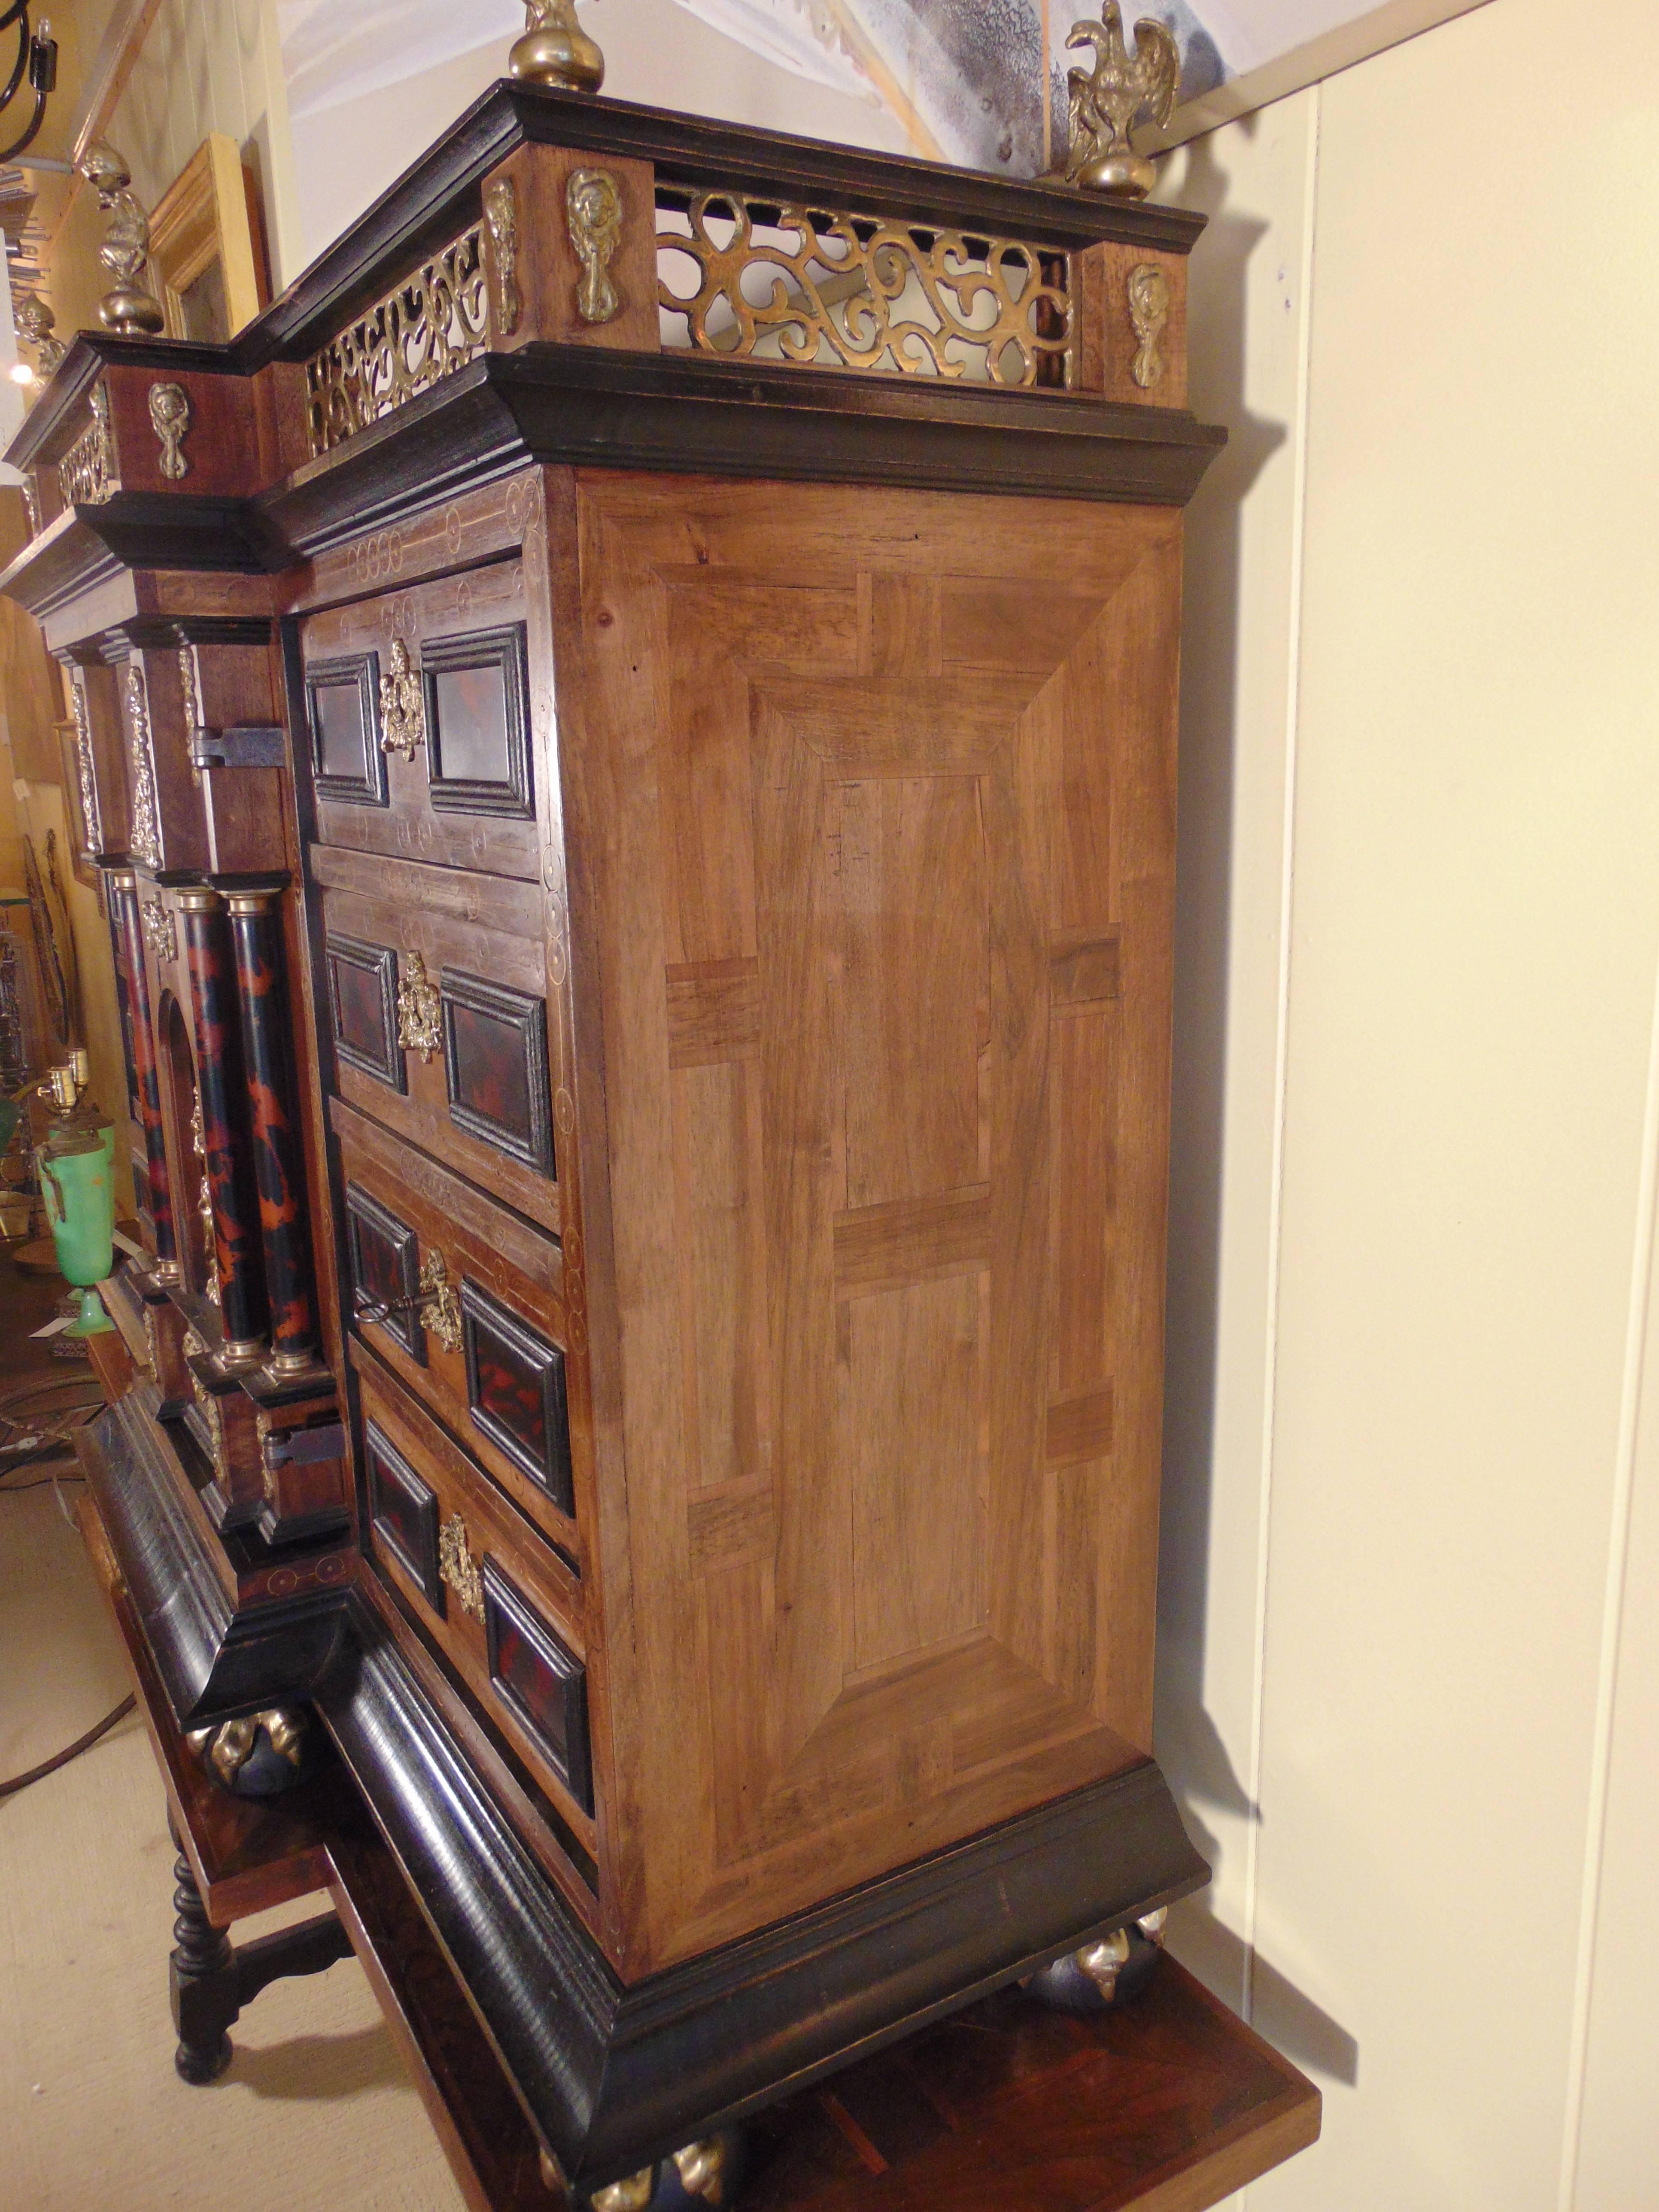 This is a finely crafted reproduction Vargueño with stand.